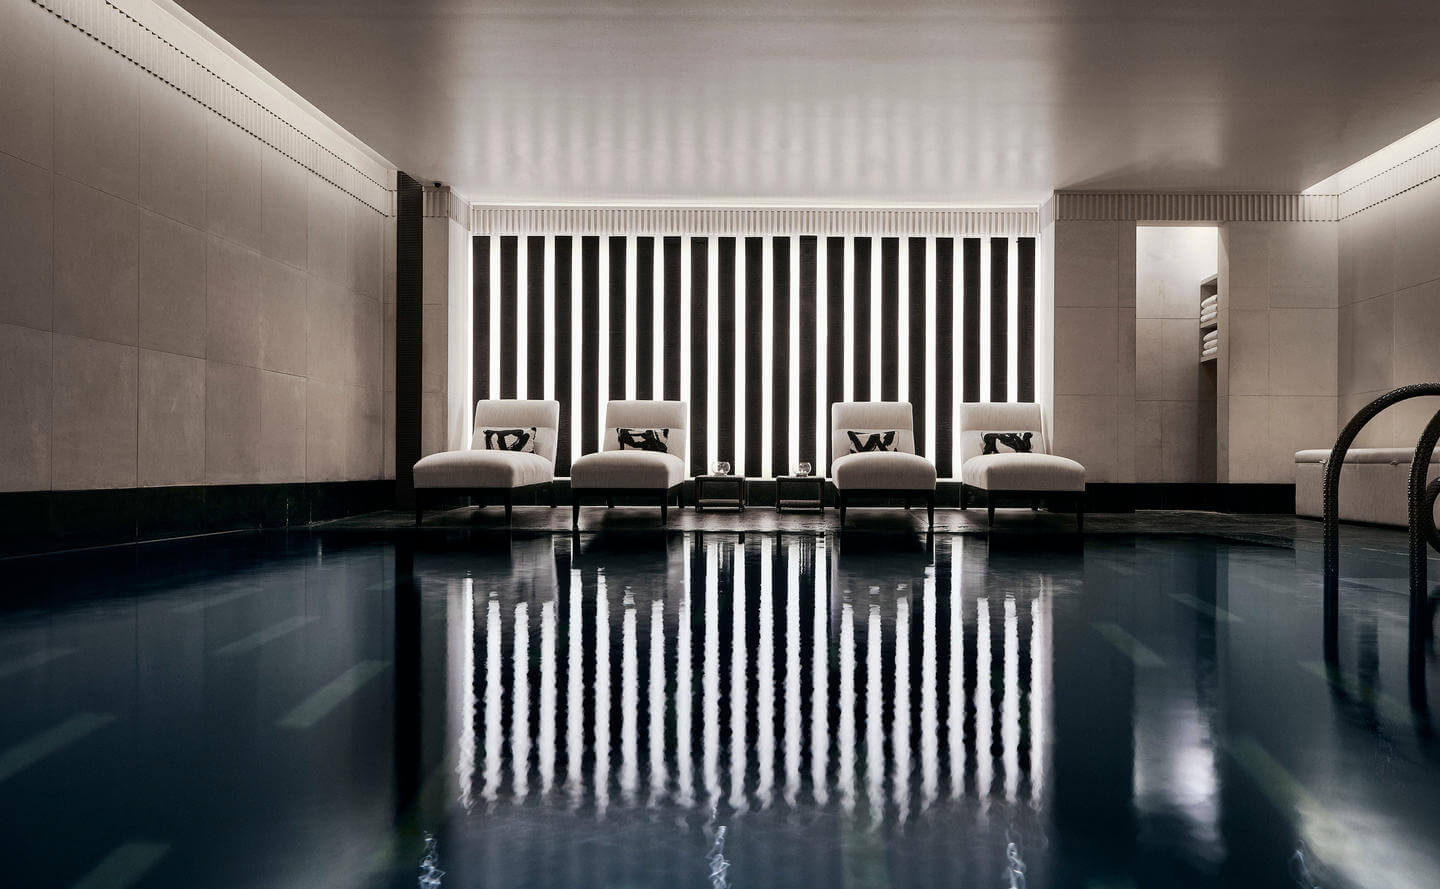 The Aman Spa at the Connaught hotel